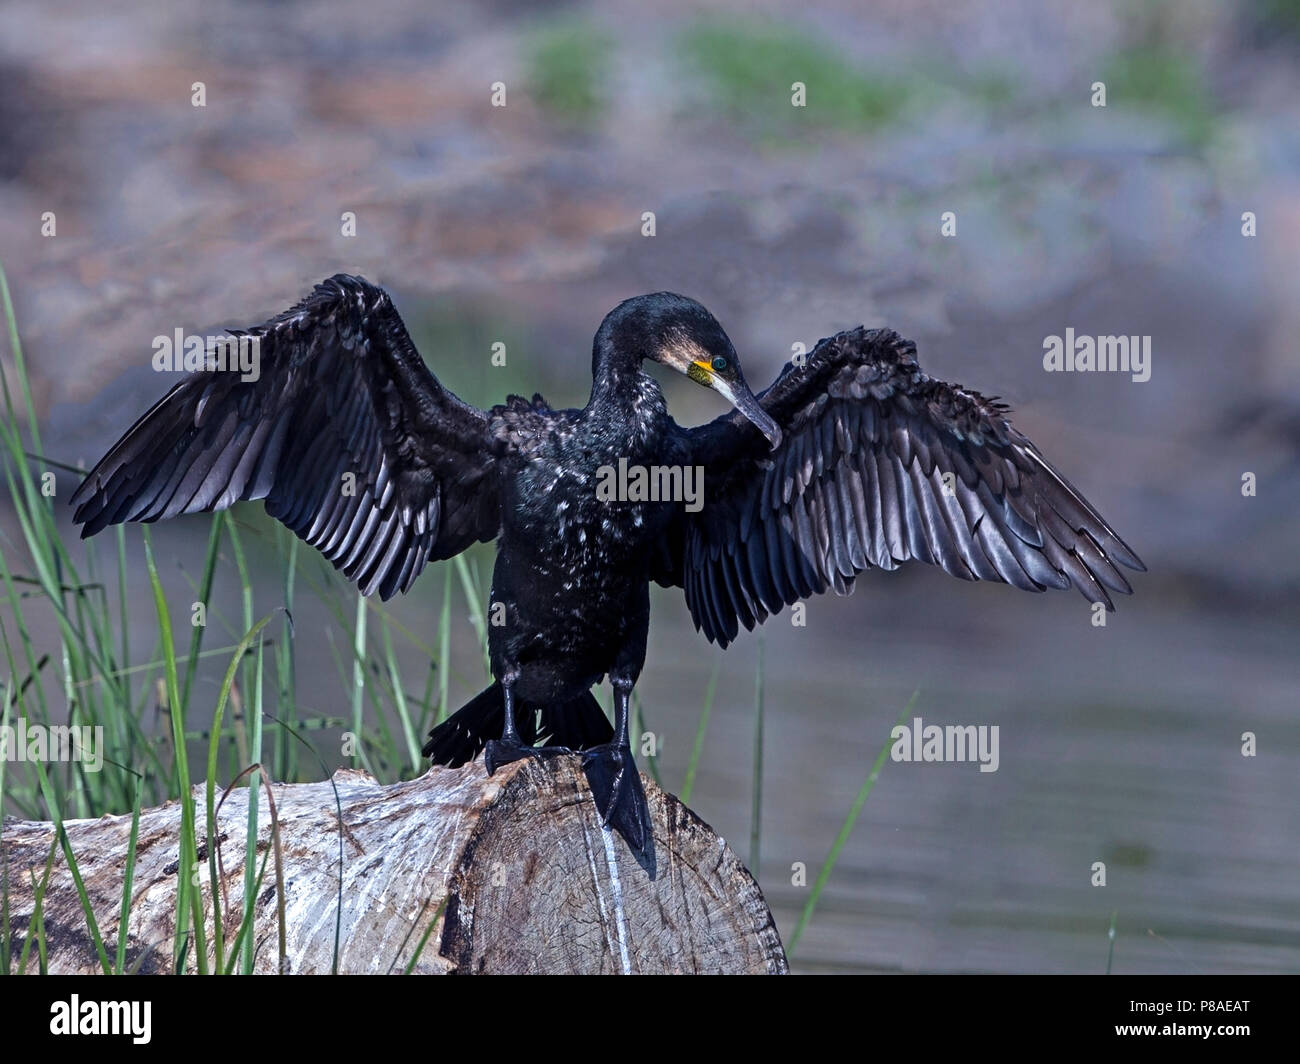 Cormorant with wings spread Stock Photos and Images